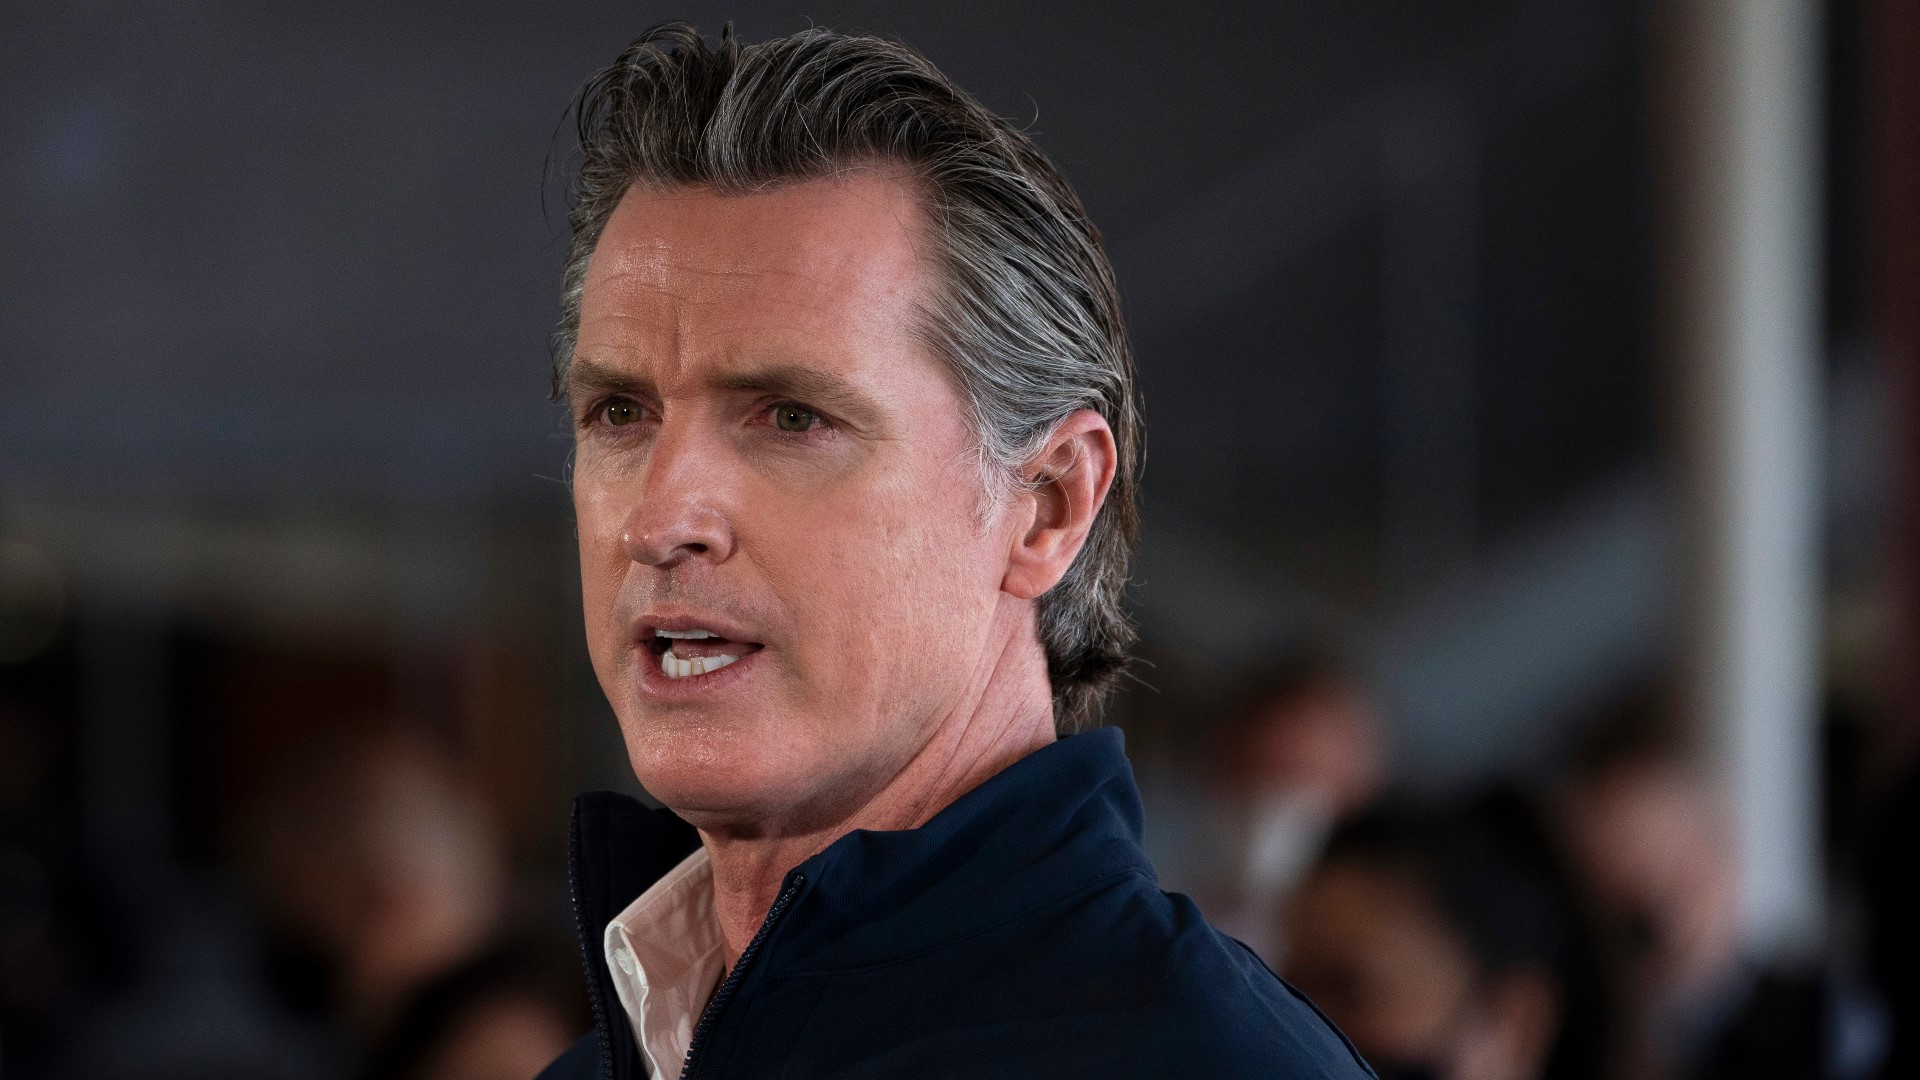 The recall petition for Gov. Gavin Newsom supposedly has enough signatures to get a recall election, but people can remove their names from the petition if they want